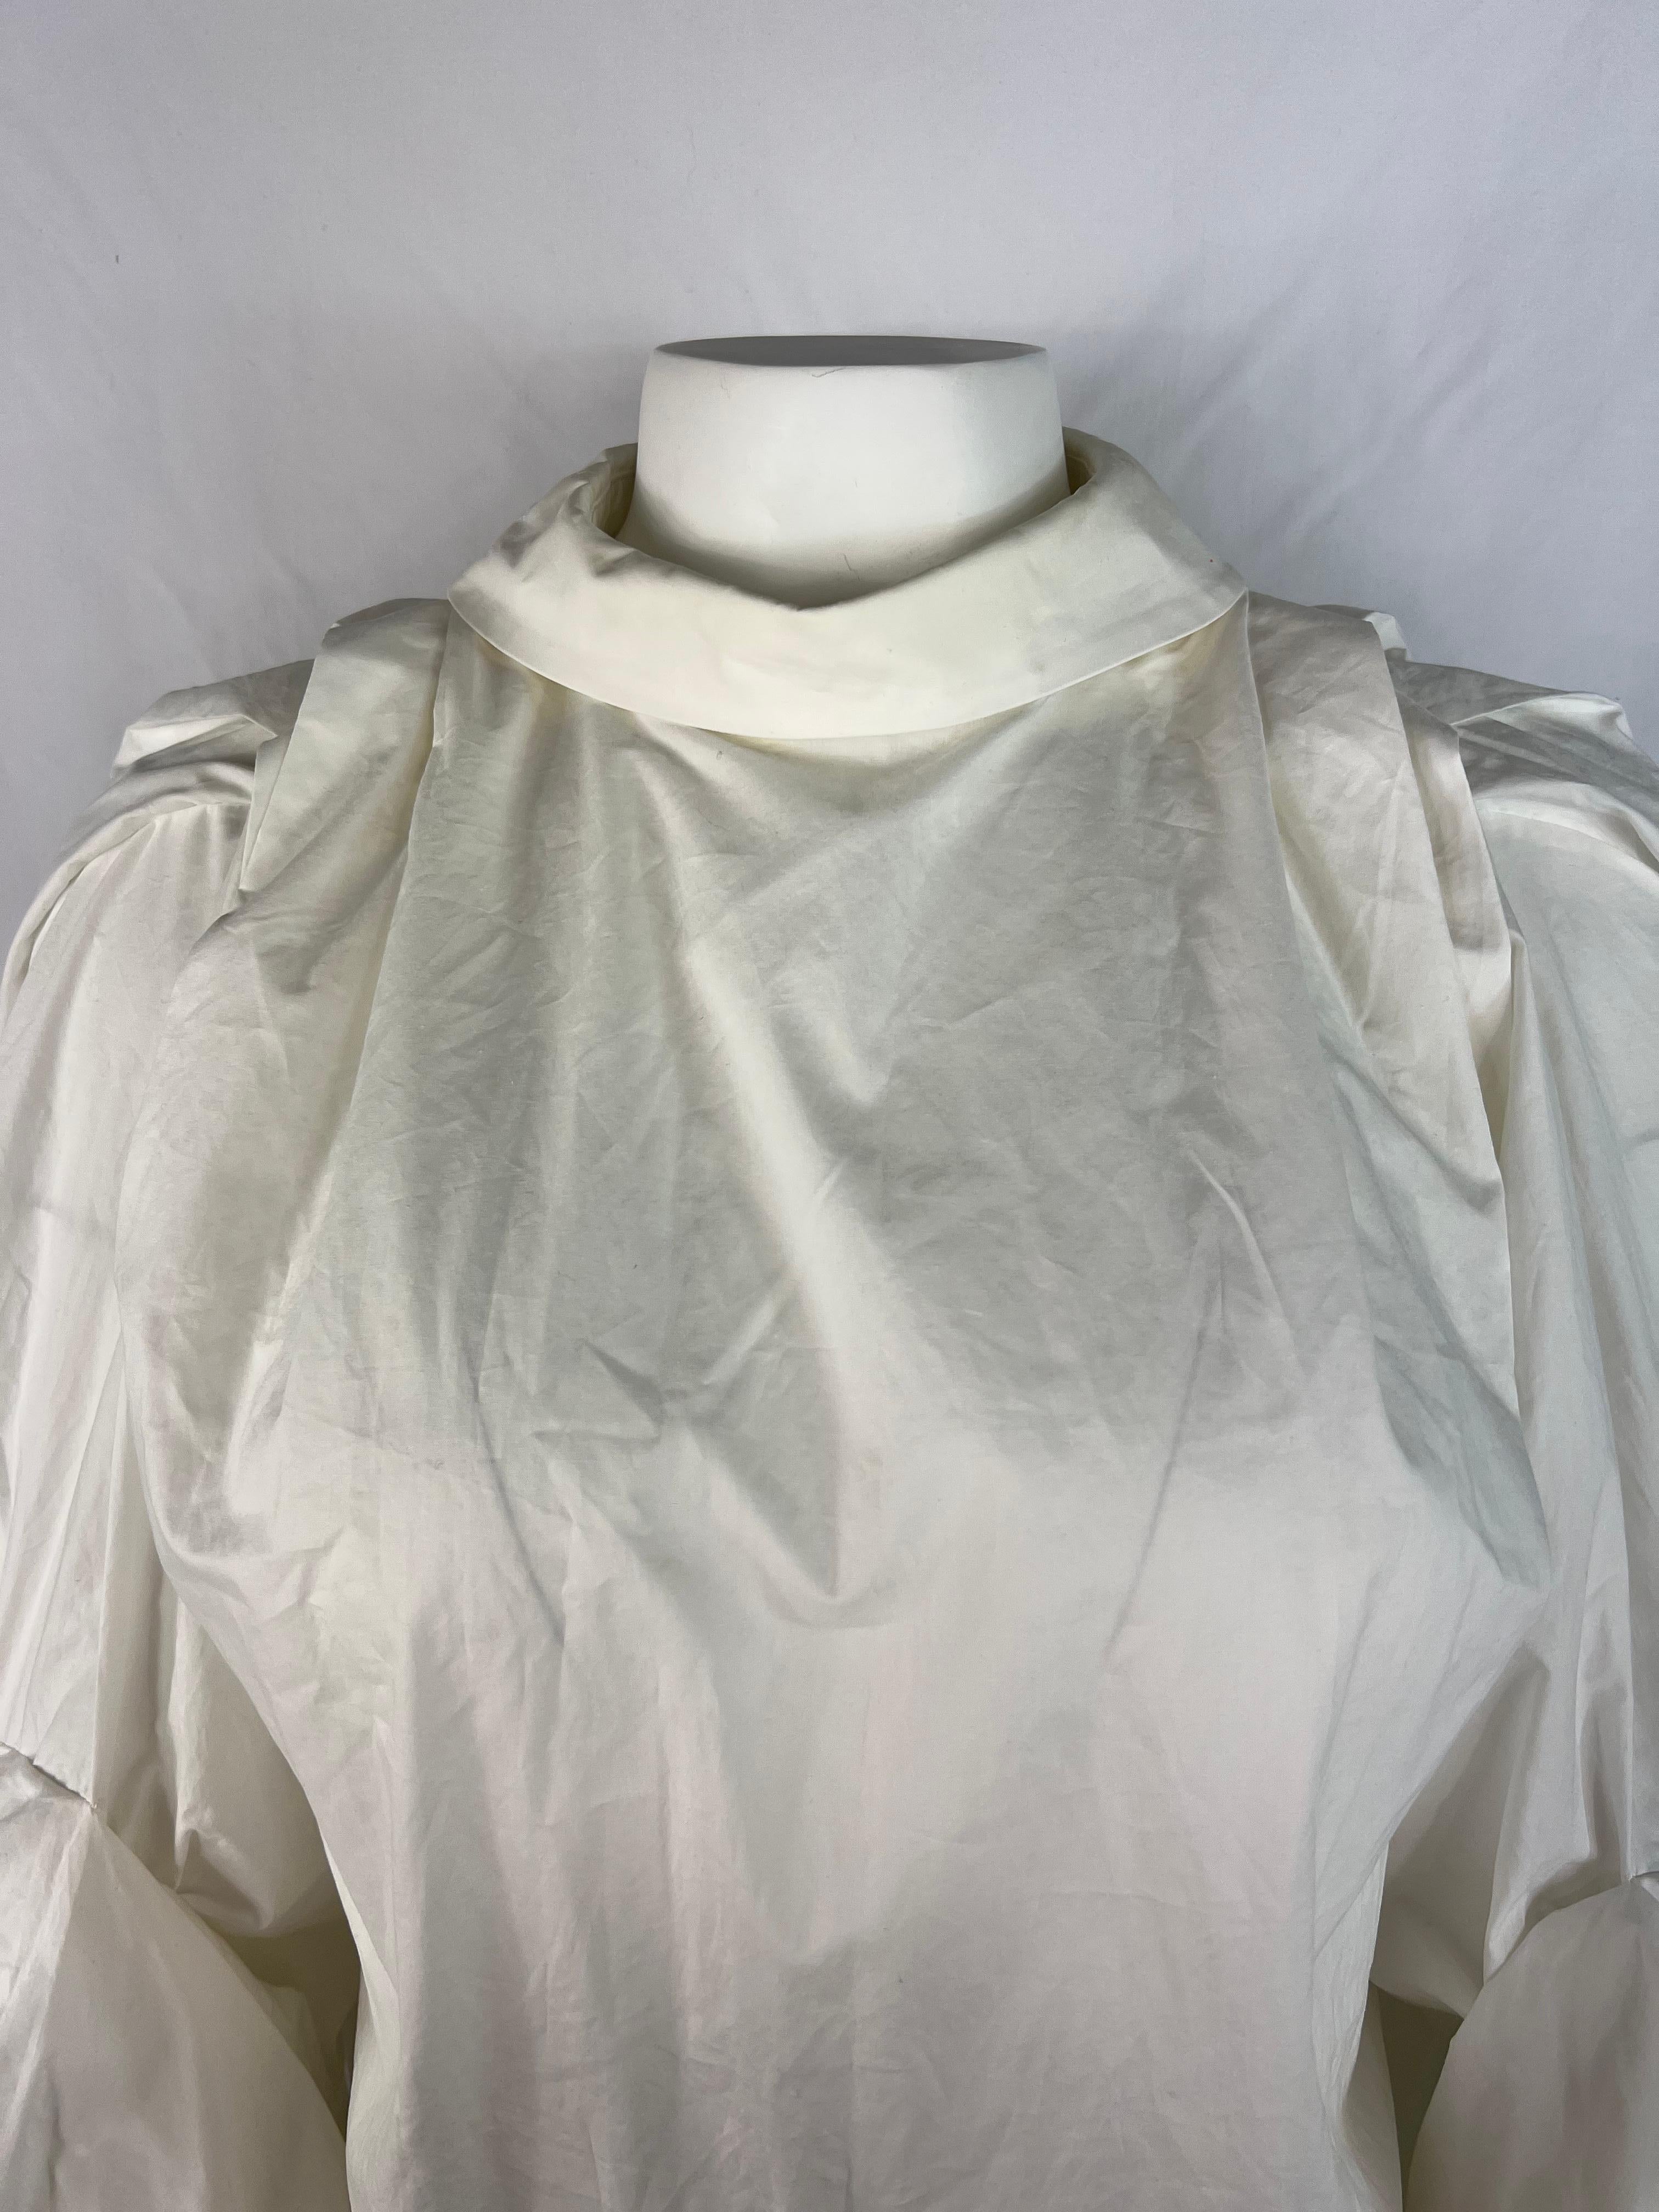 Product details:

The bourse is made out of 100% white cotton. It features collar, loose fit with rear zip and button closure, and 3/4 sleeves length.